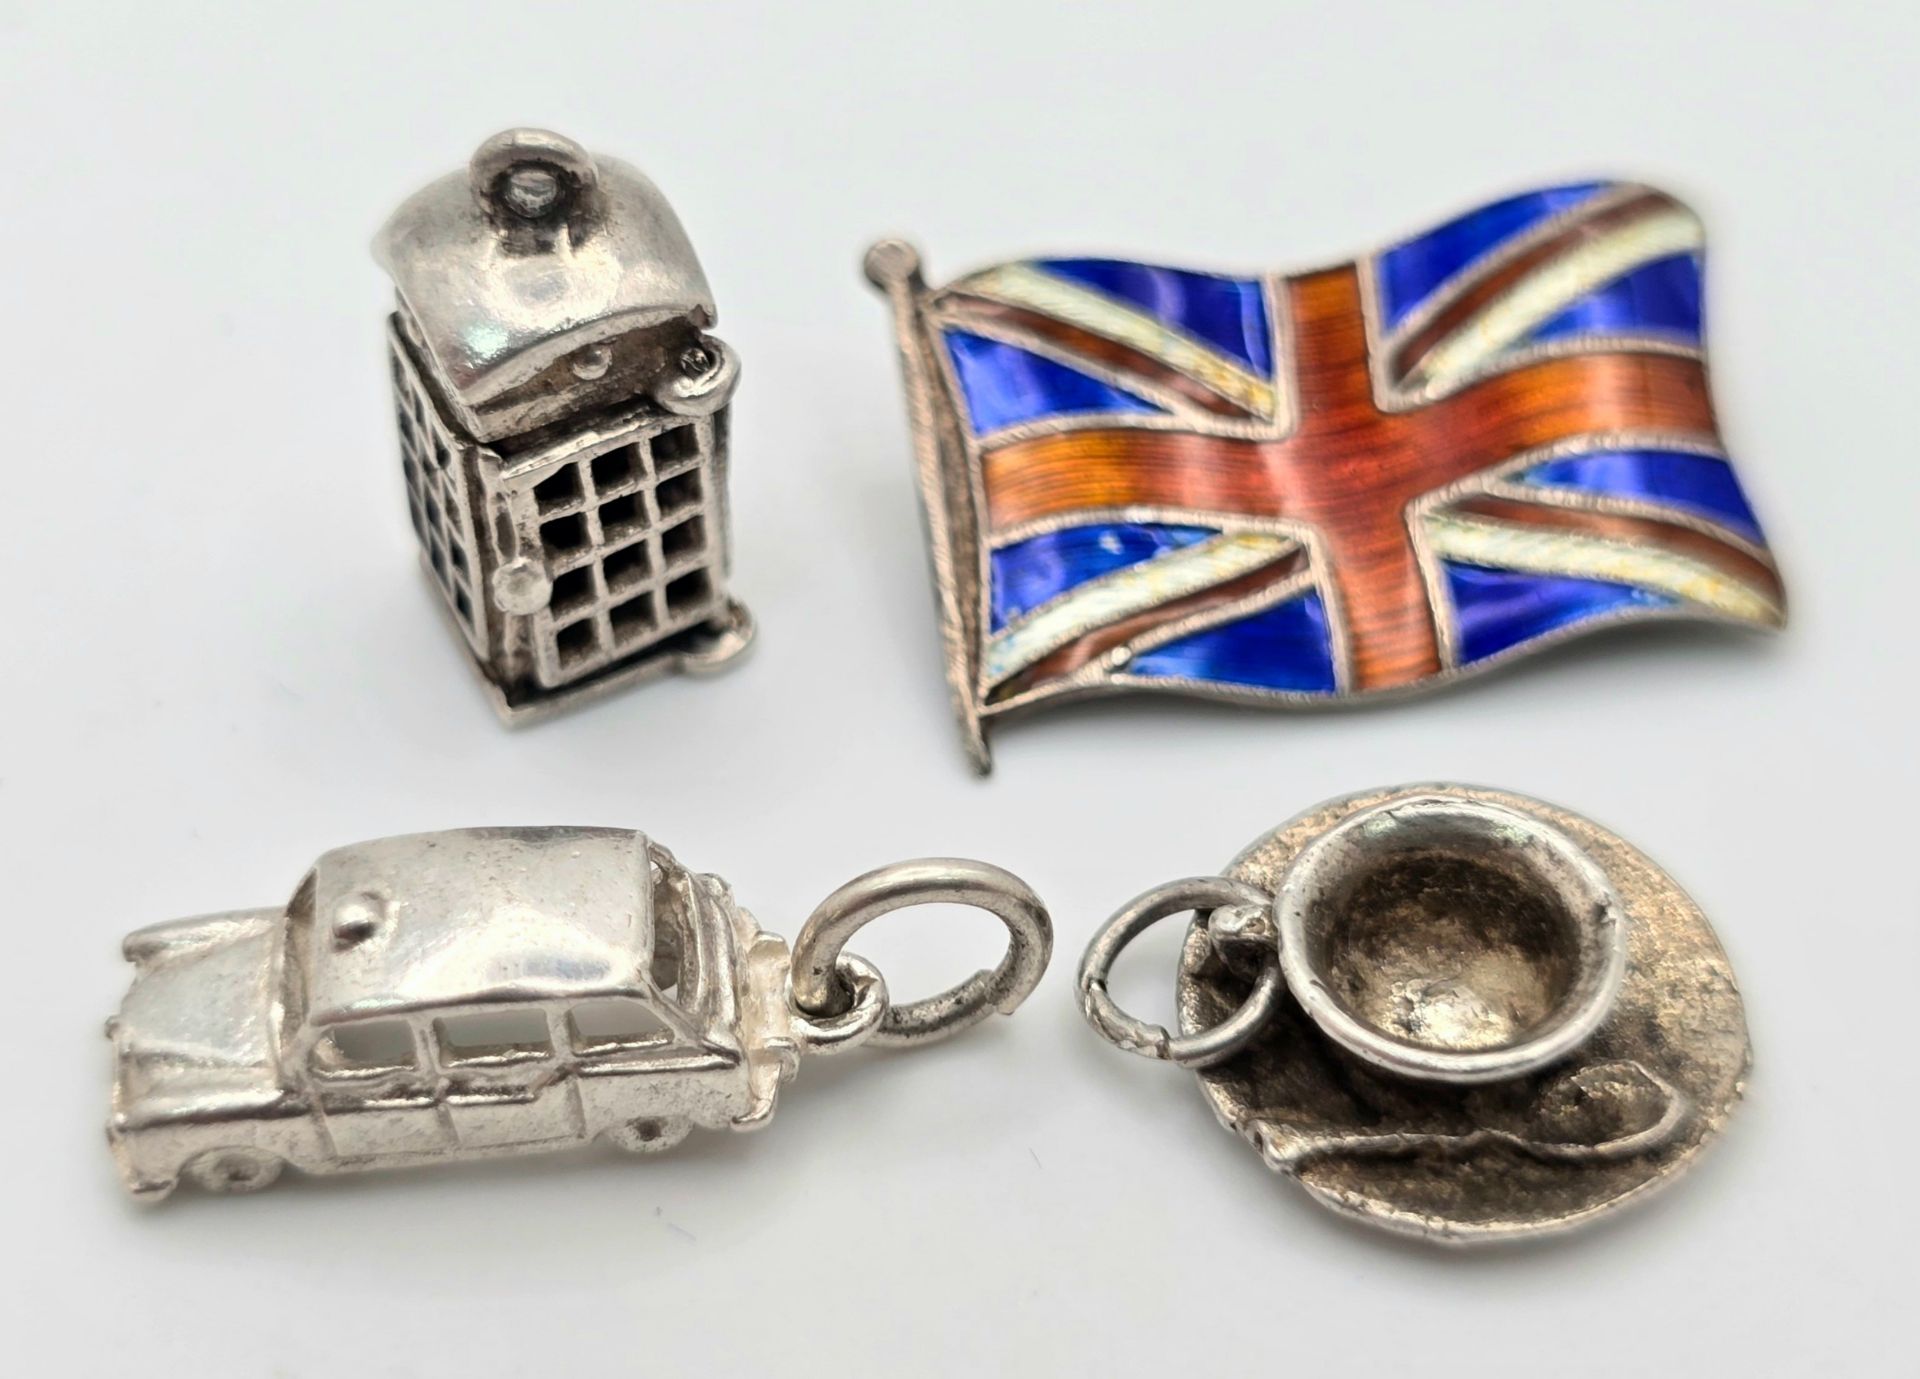 A STERLING SILVER LONDON THEMED COLLECTION OF ITEMS - UNION JACK FLAG BROOCH, CUP OF TEA CHARM,